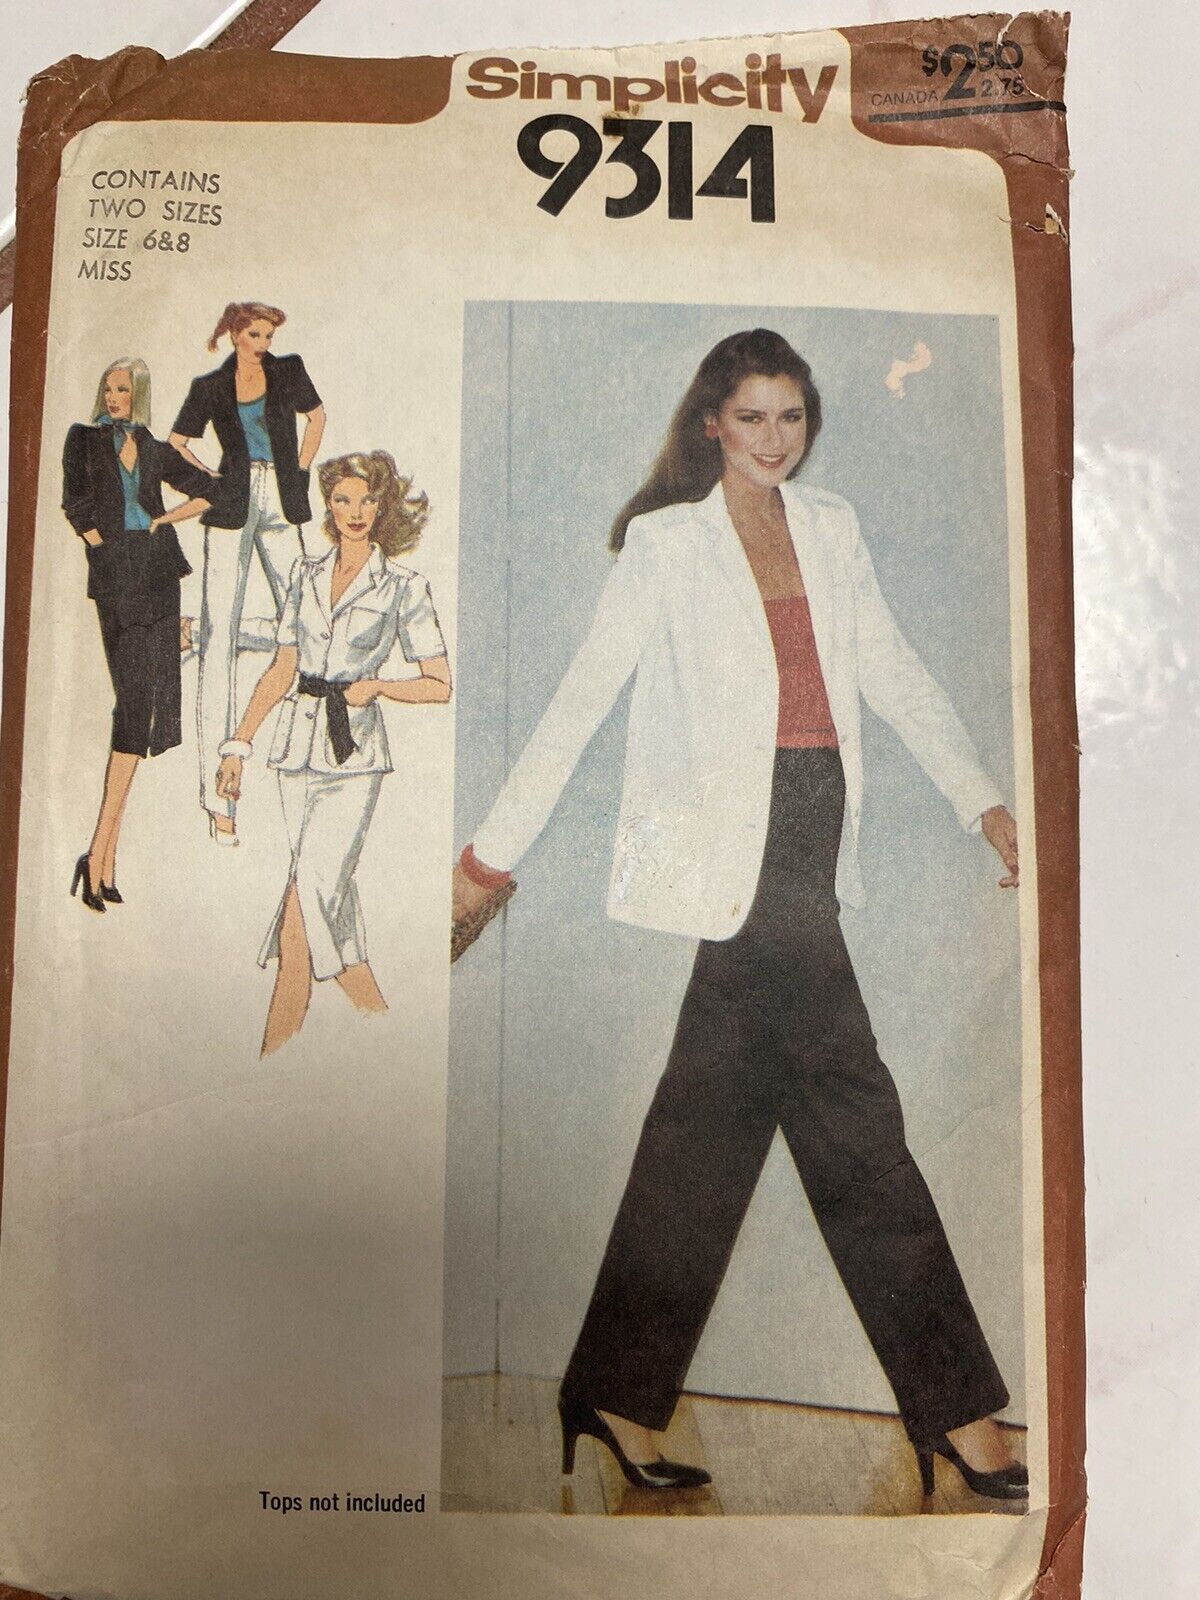 1979 Simplicity Sewing Pattern 9314 Sizes 6 & 8 Cut & Complete 